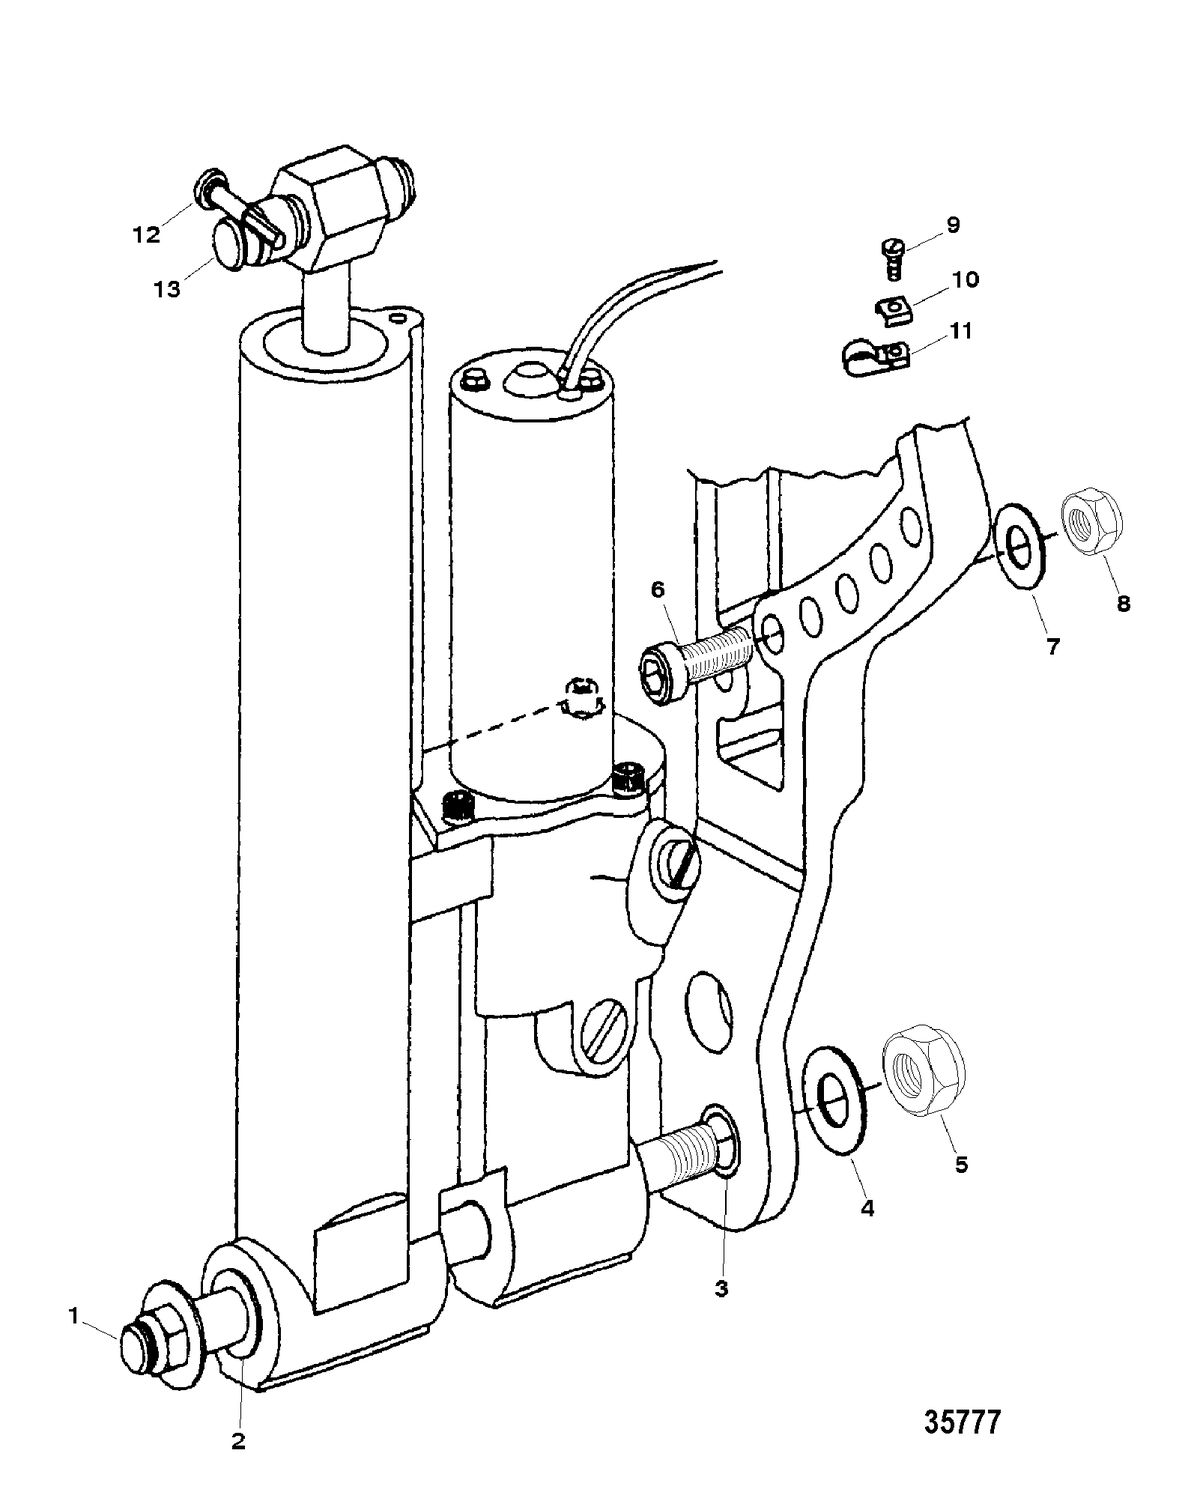 FORCE FORCE 40/50 H.P. (1998-1999) Trim Mounting, Hydraulic